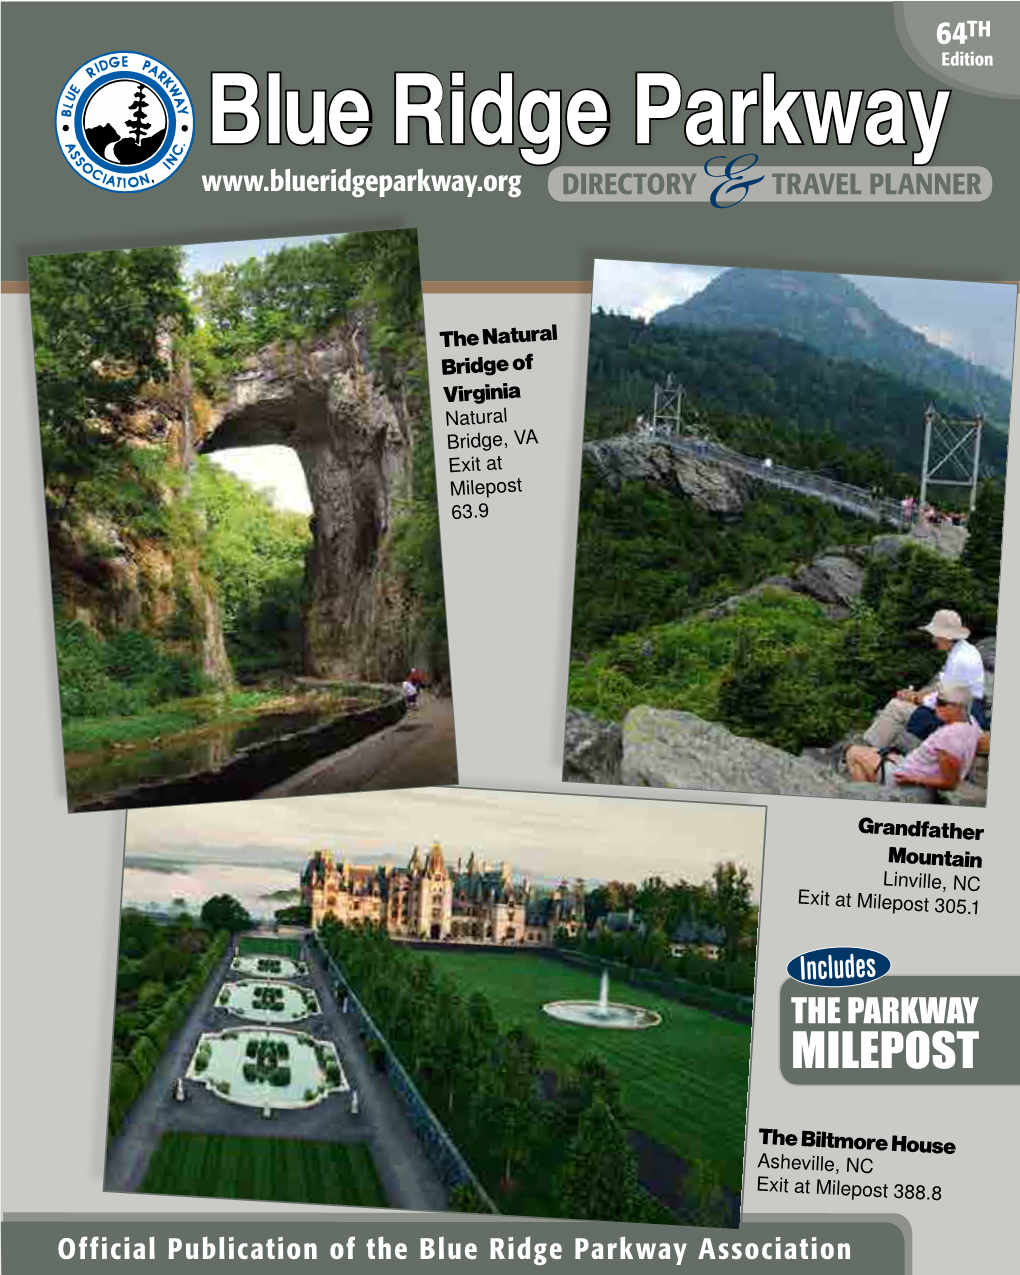 Blue Ridge Parkway Recreation, Hiking, Bicycling, Directory Travel PLANNER Picnicking, Camping, Wildlife Viewing and Much More